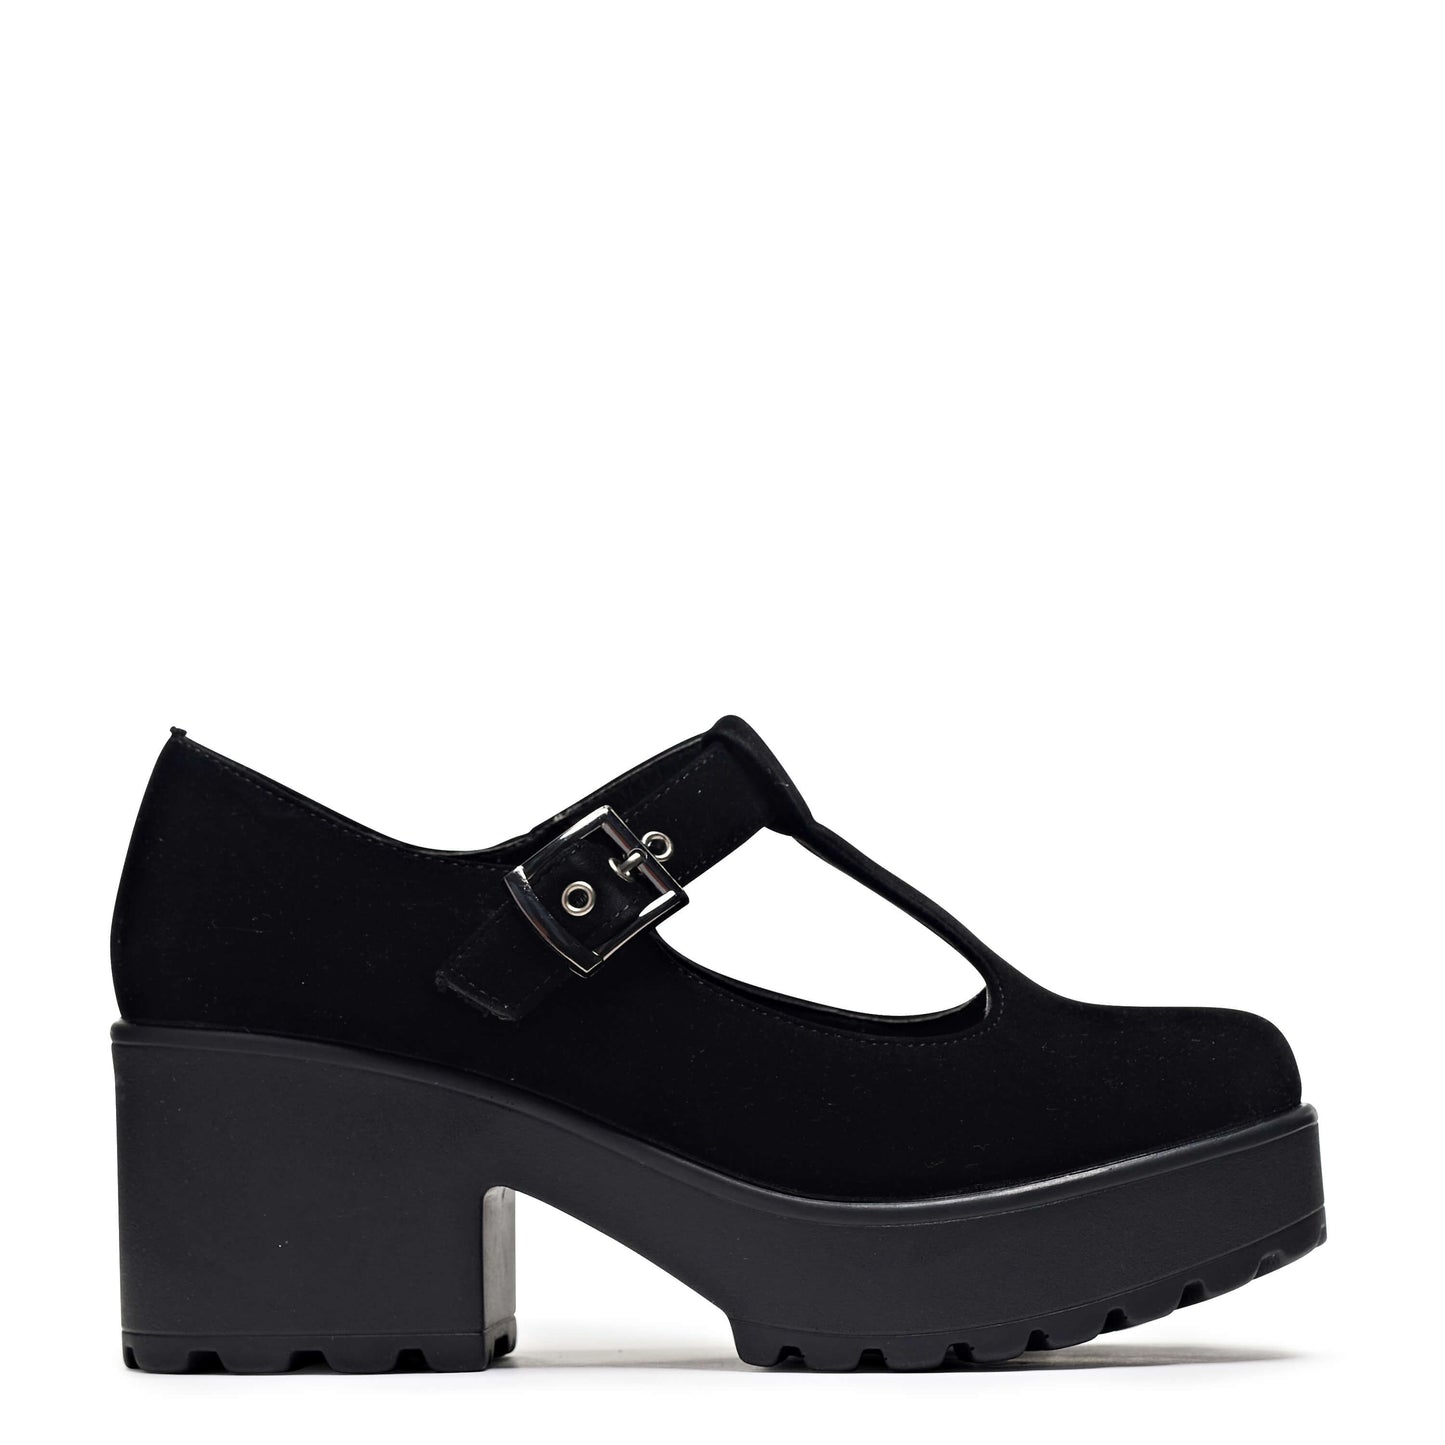 Sai Black Mary Jane Shoes 'Suede Edition' - Mary Janes - KOI Footwear - Black - Main View